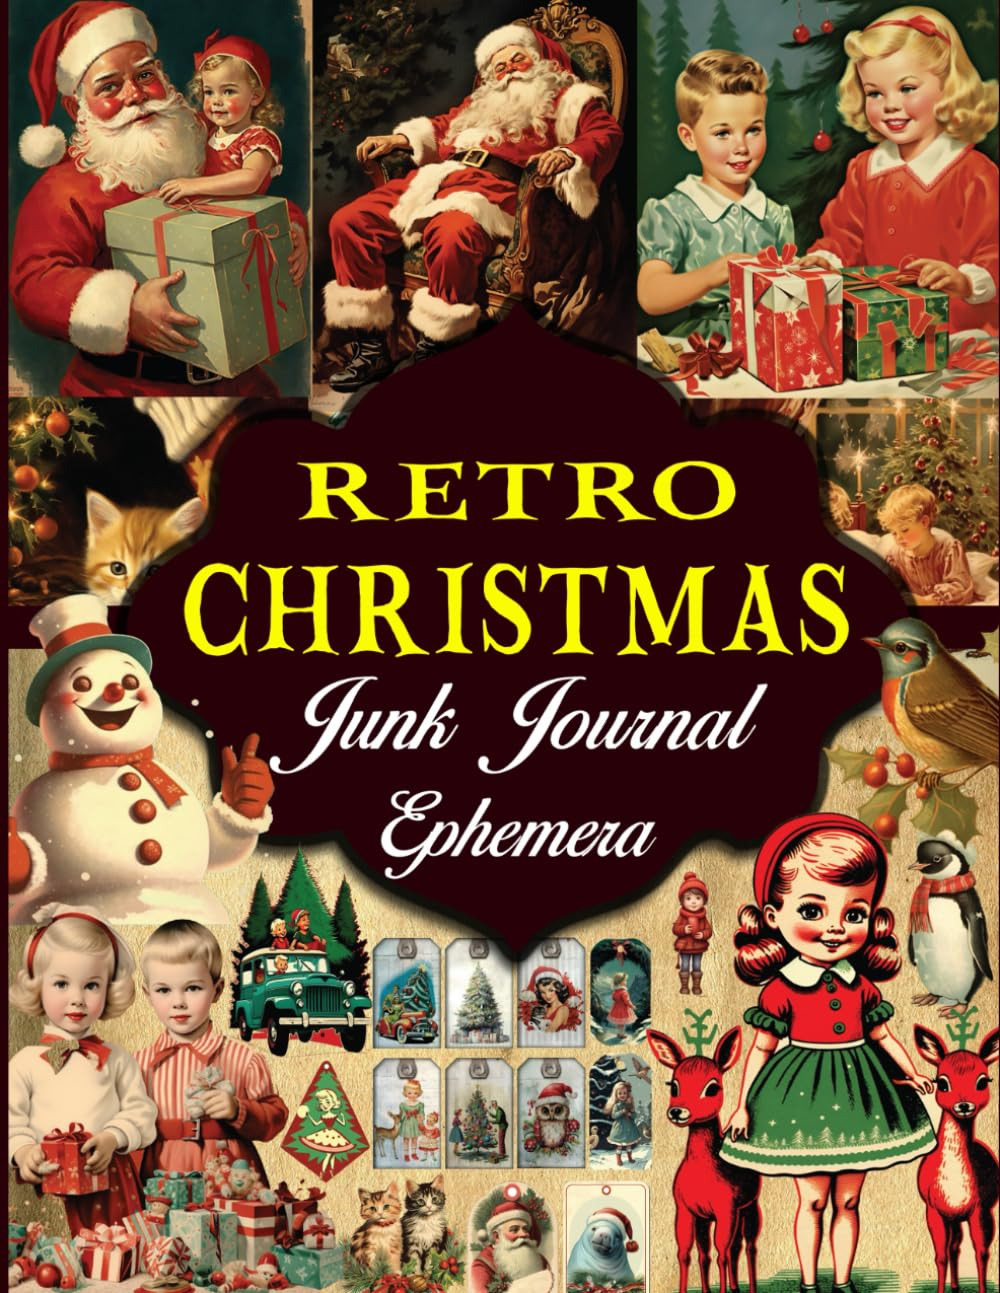 Retro Christmas Junk Journal Ephemera: over 125 Pieces of Old 60S, 70S Chr - NEW